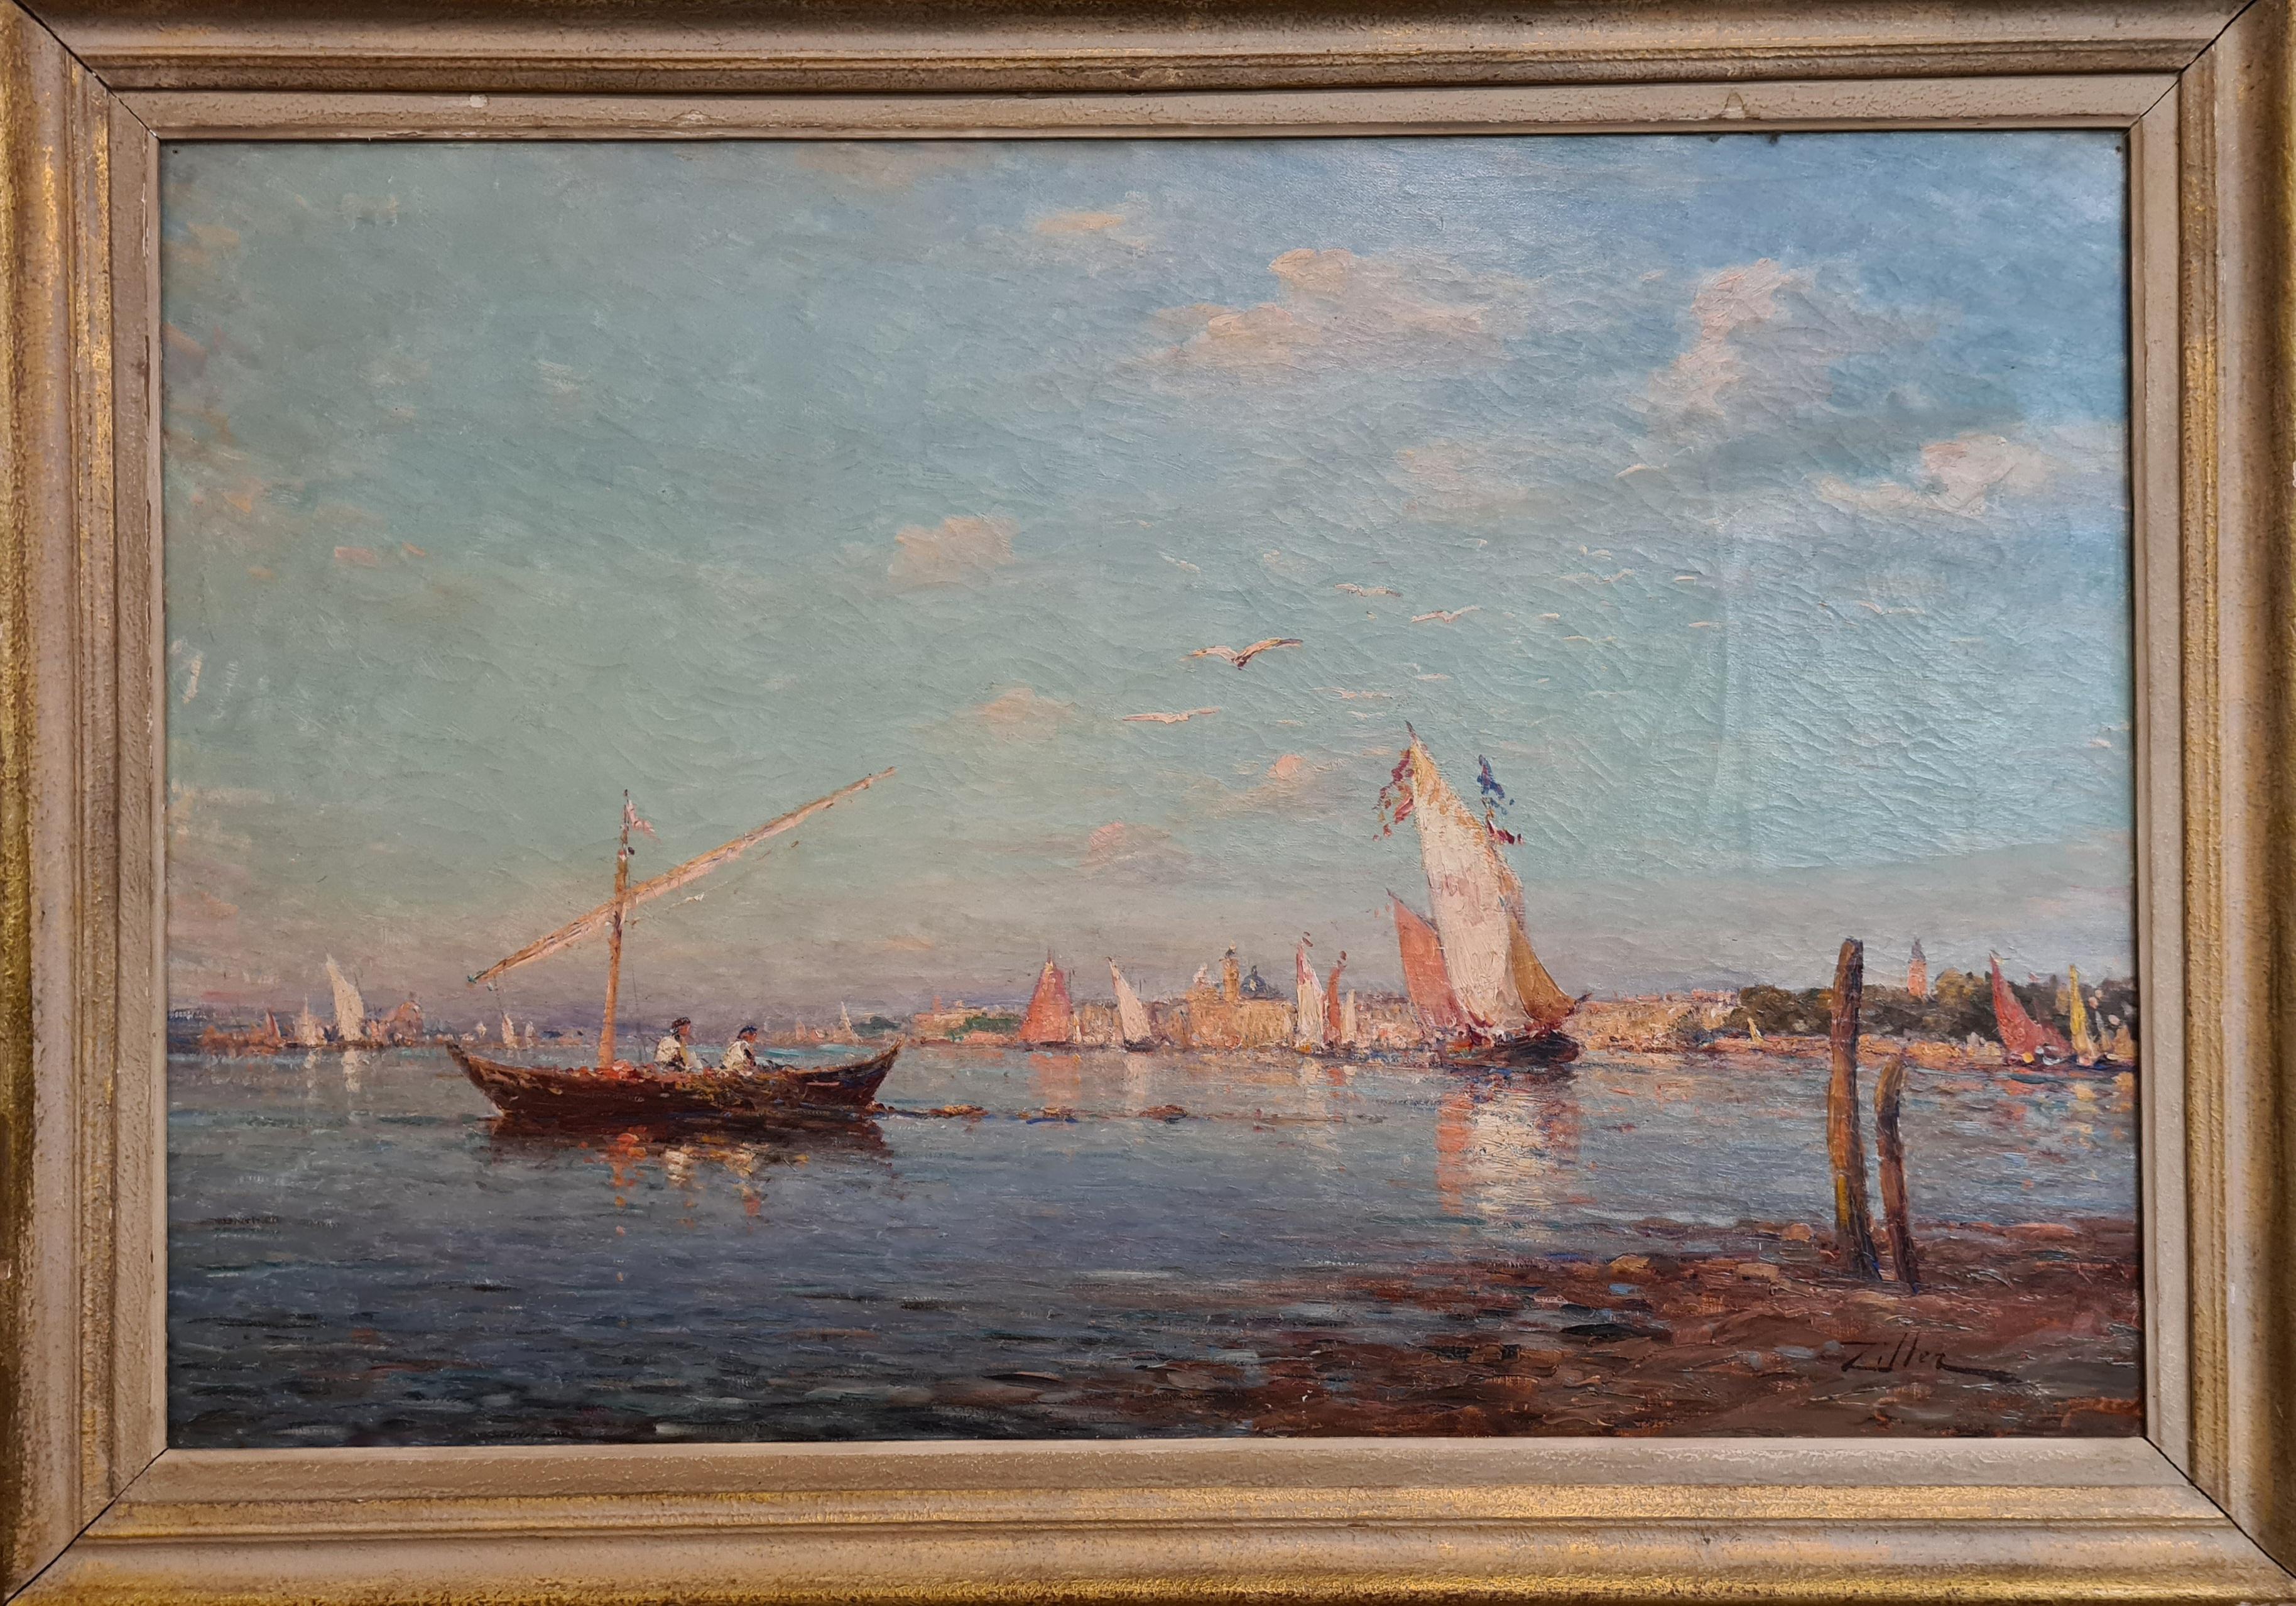 Boats on the the Venice Lagoon, Looking Towards the Doge's Palace and St Mark's. - Painting by Leopold Ziller